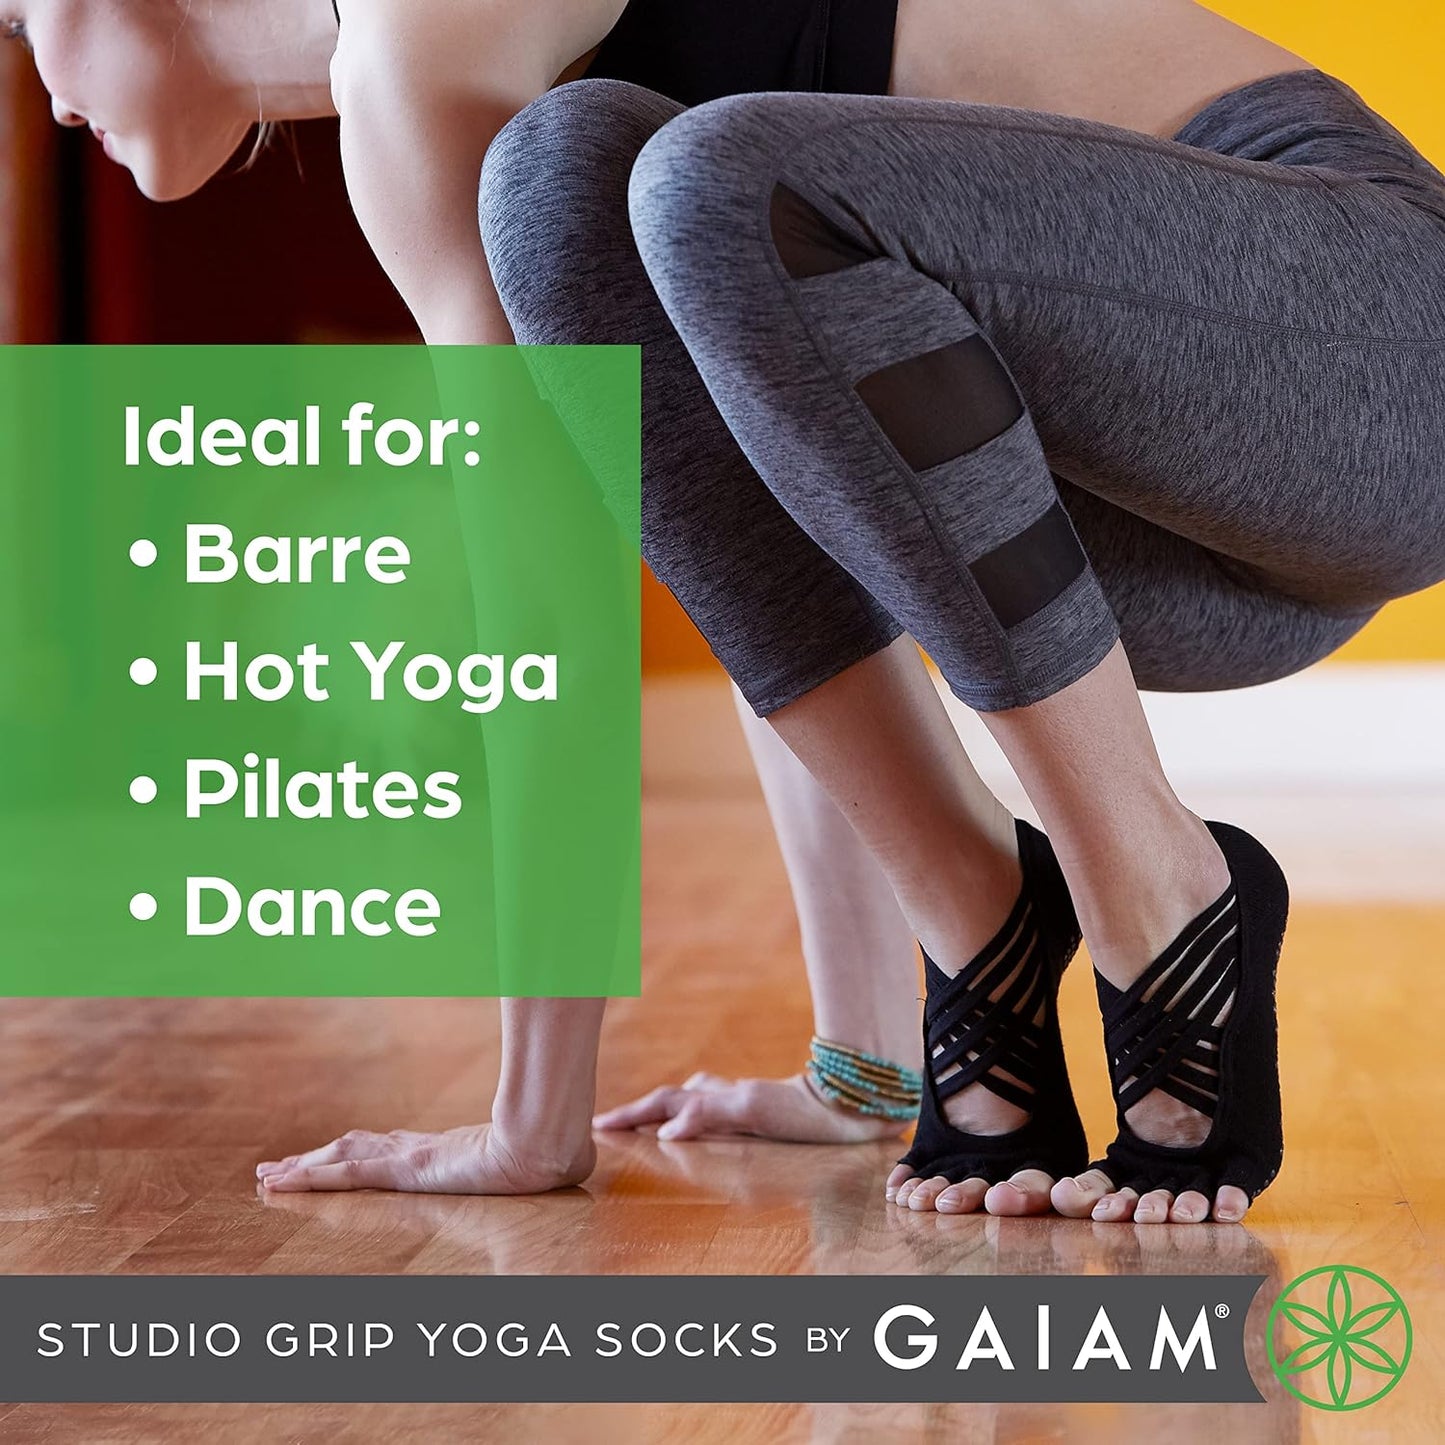 Grippy Studio Yoga Socks for Extra Grip in Standard or Hot Yoga, Barre, Pilates, Ballet or at Home for Added Balance and Stability, Black, Small-Medium, One Size